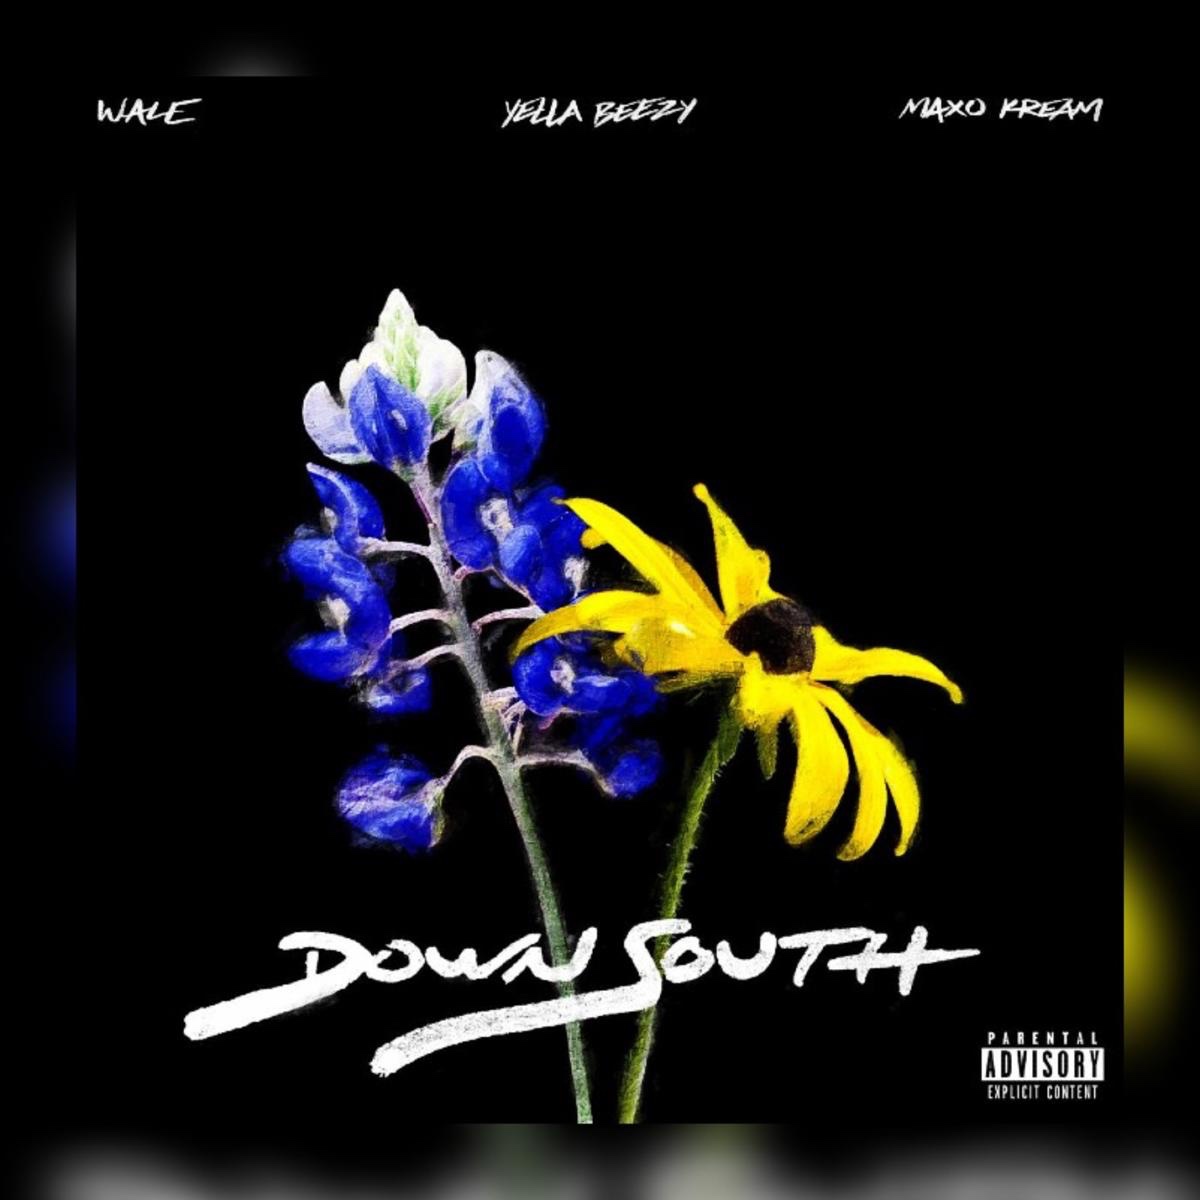 Wale Calls On Yella Beezy & Maxo Kream For “Down South”